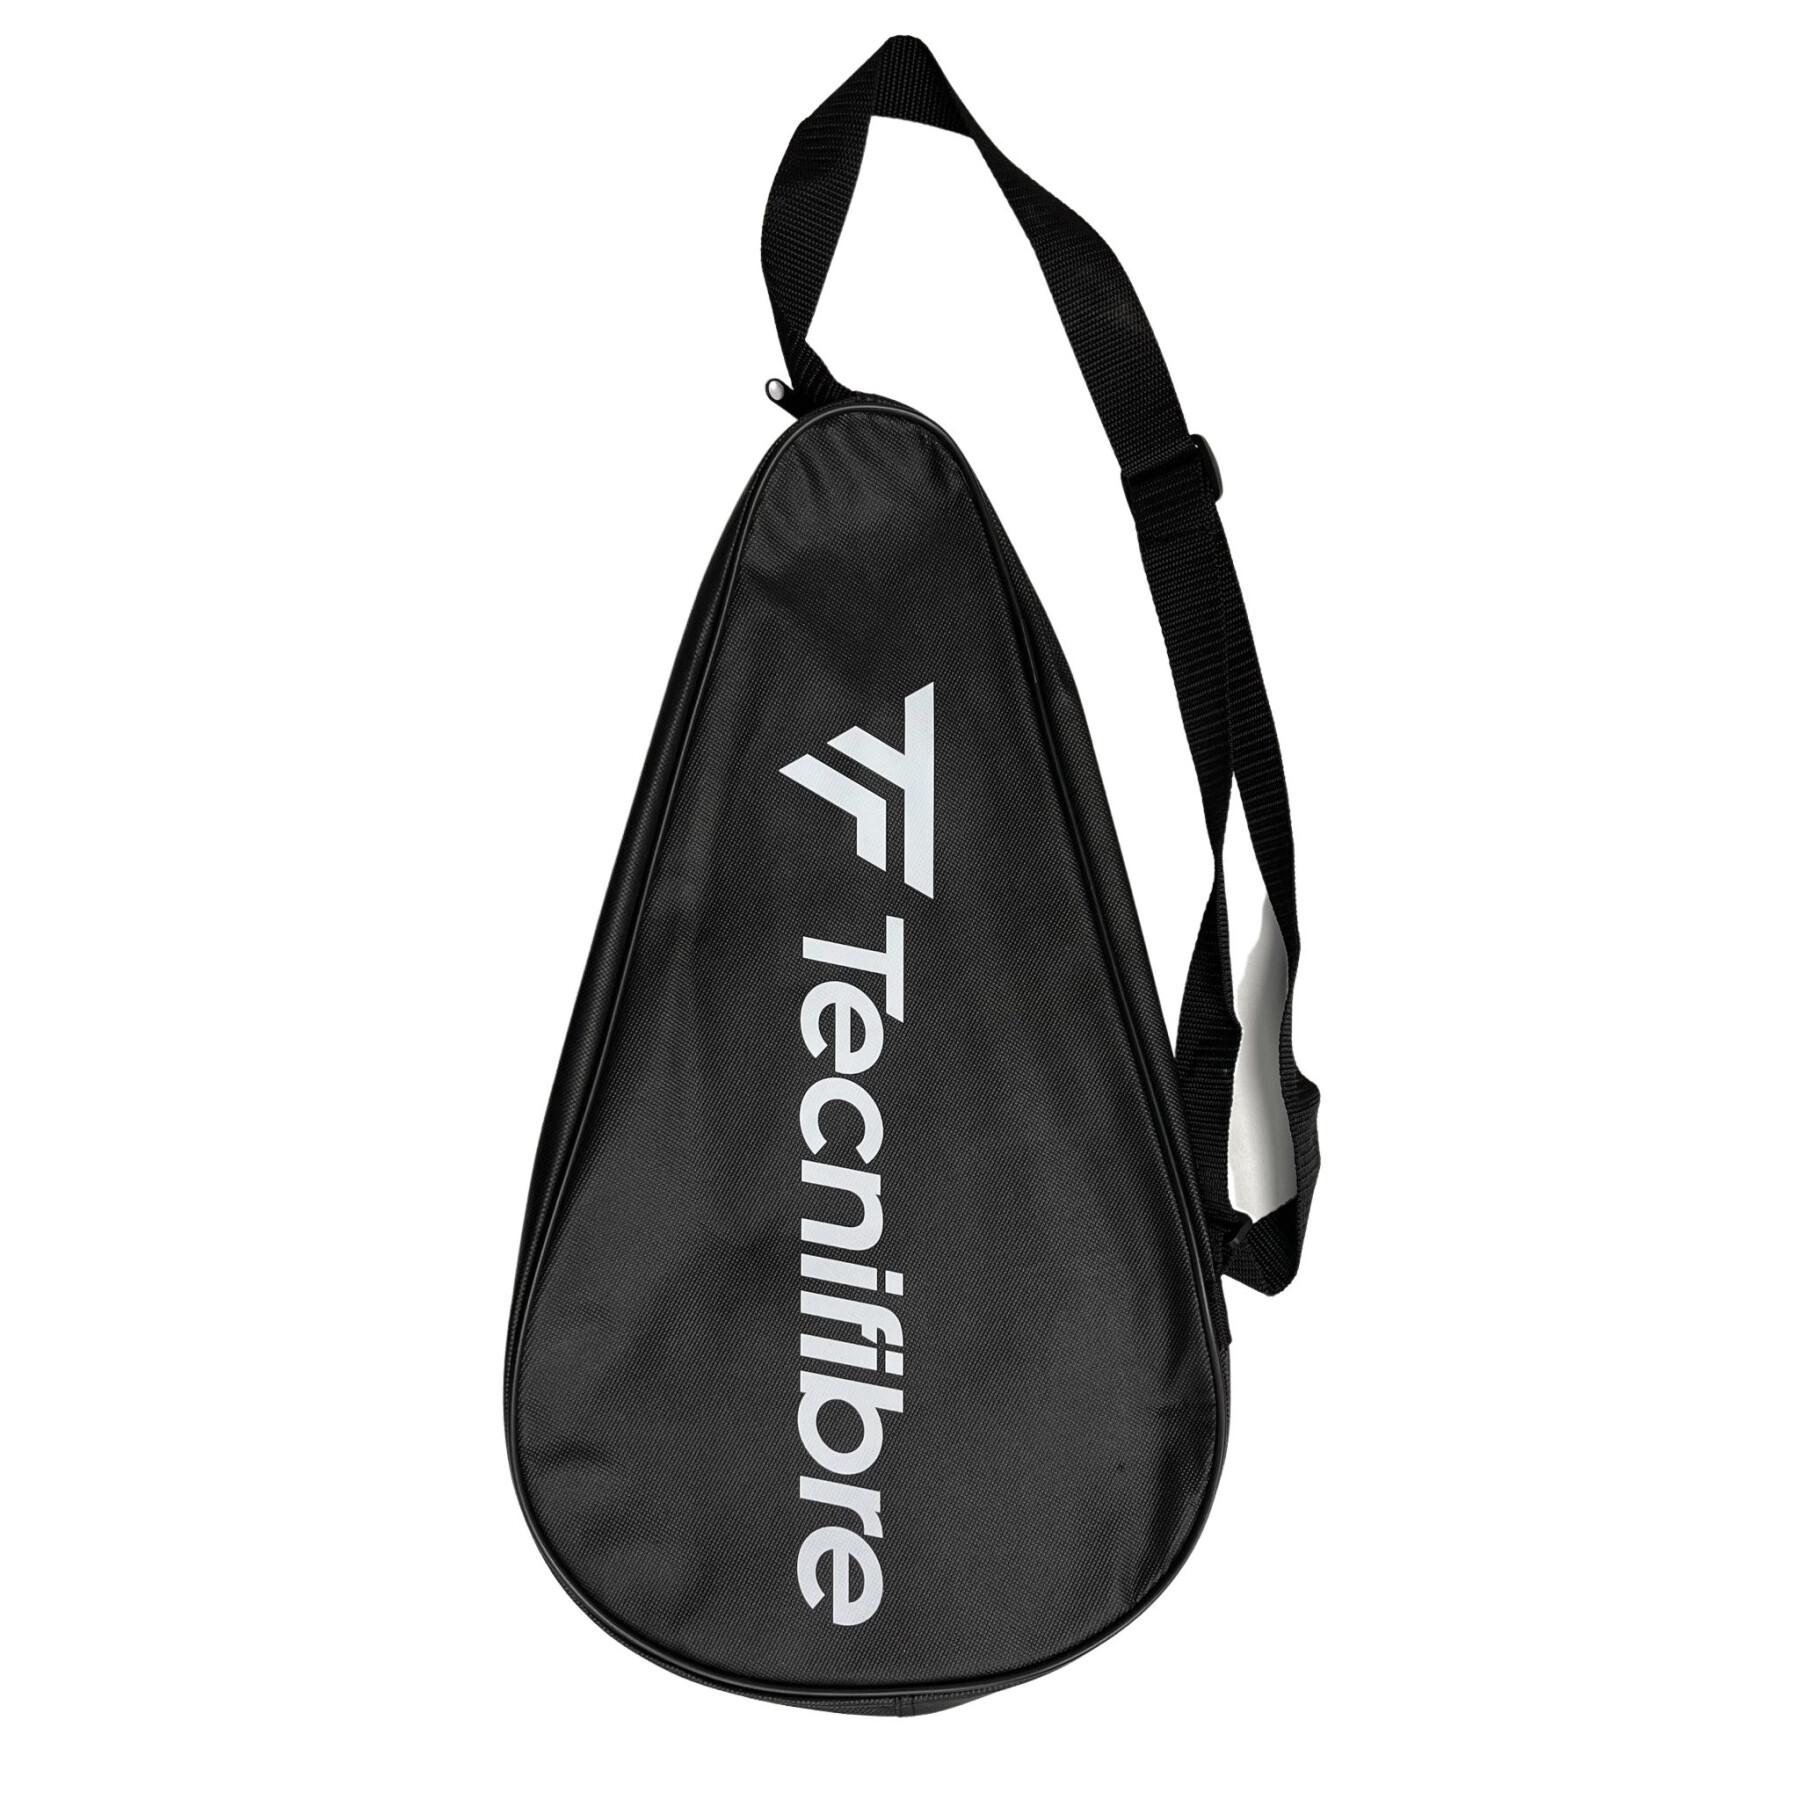 Racket cover from padel Tecnifibre